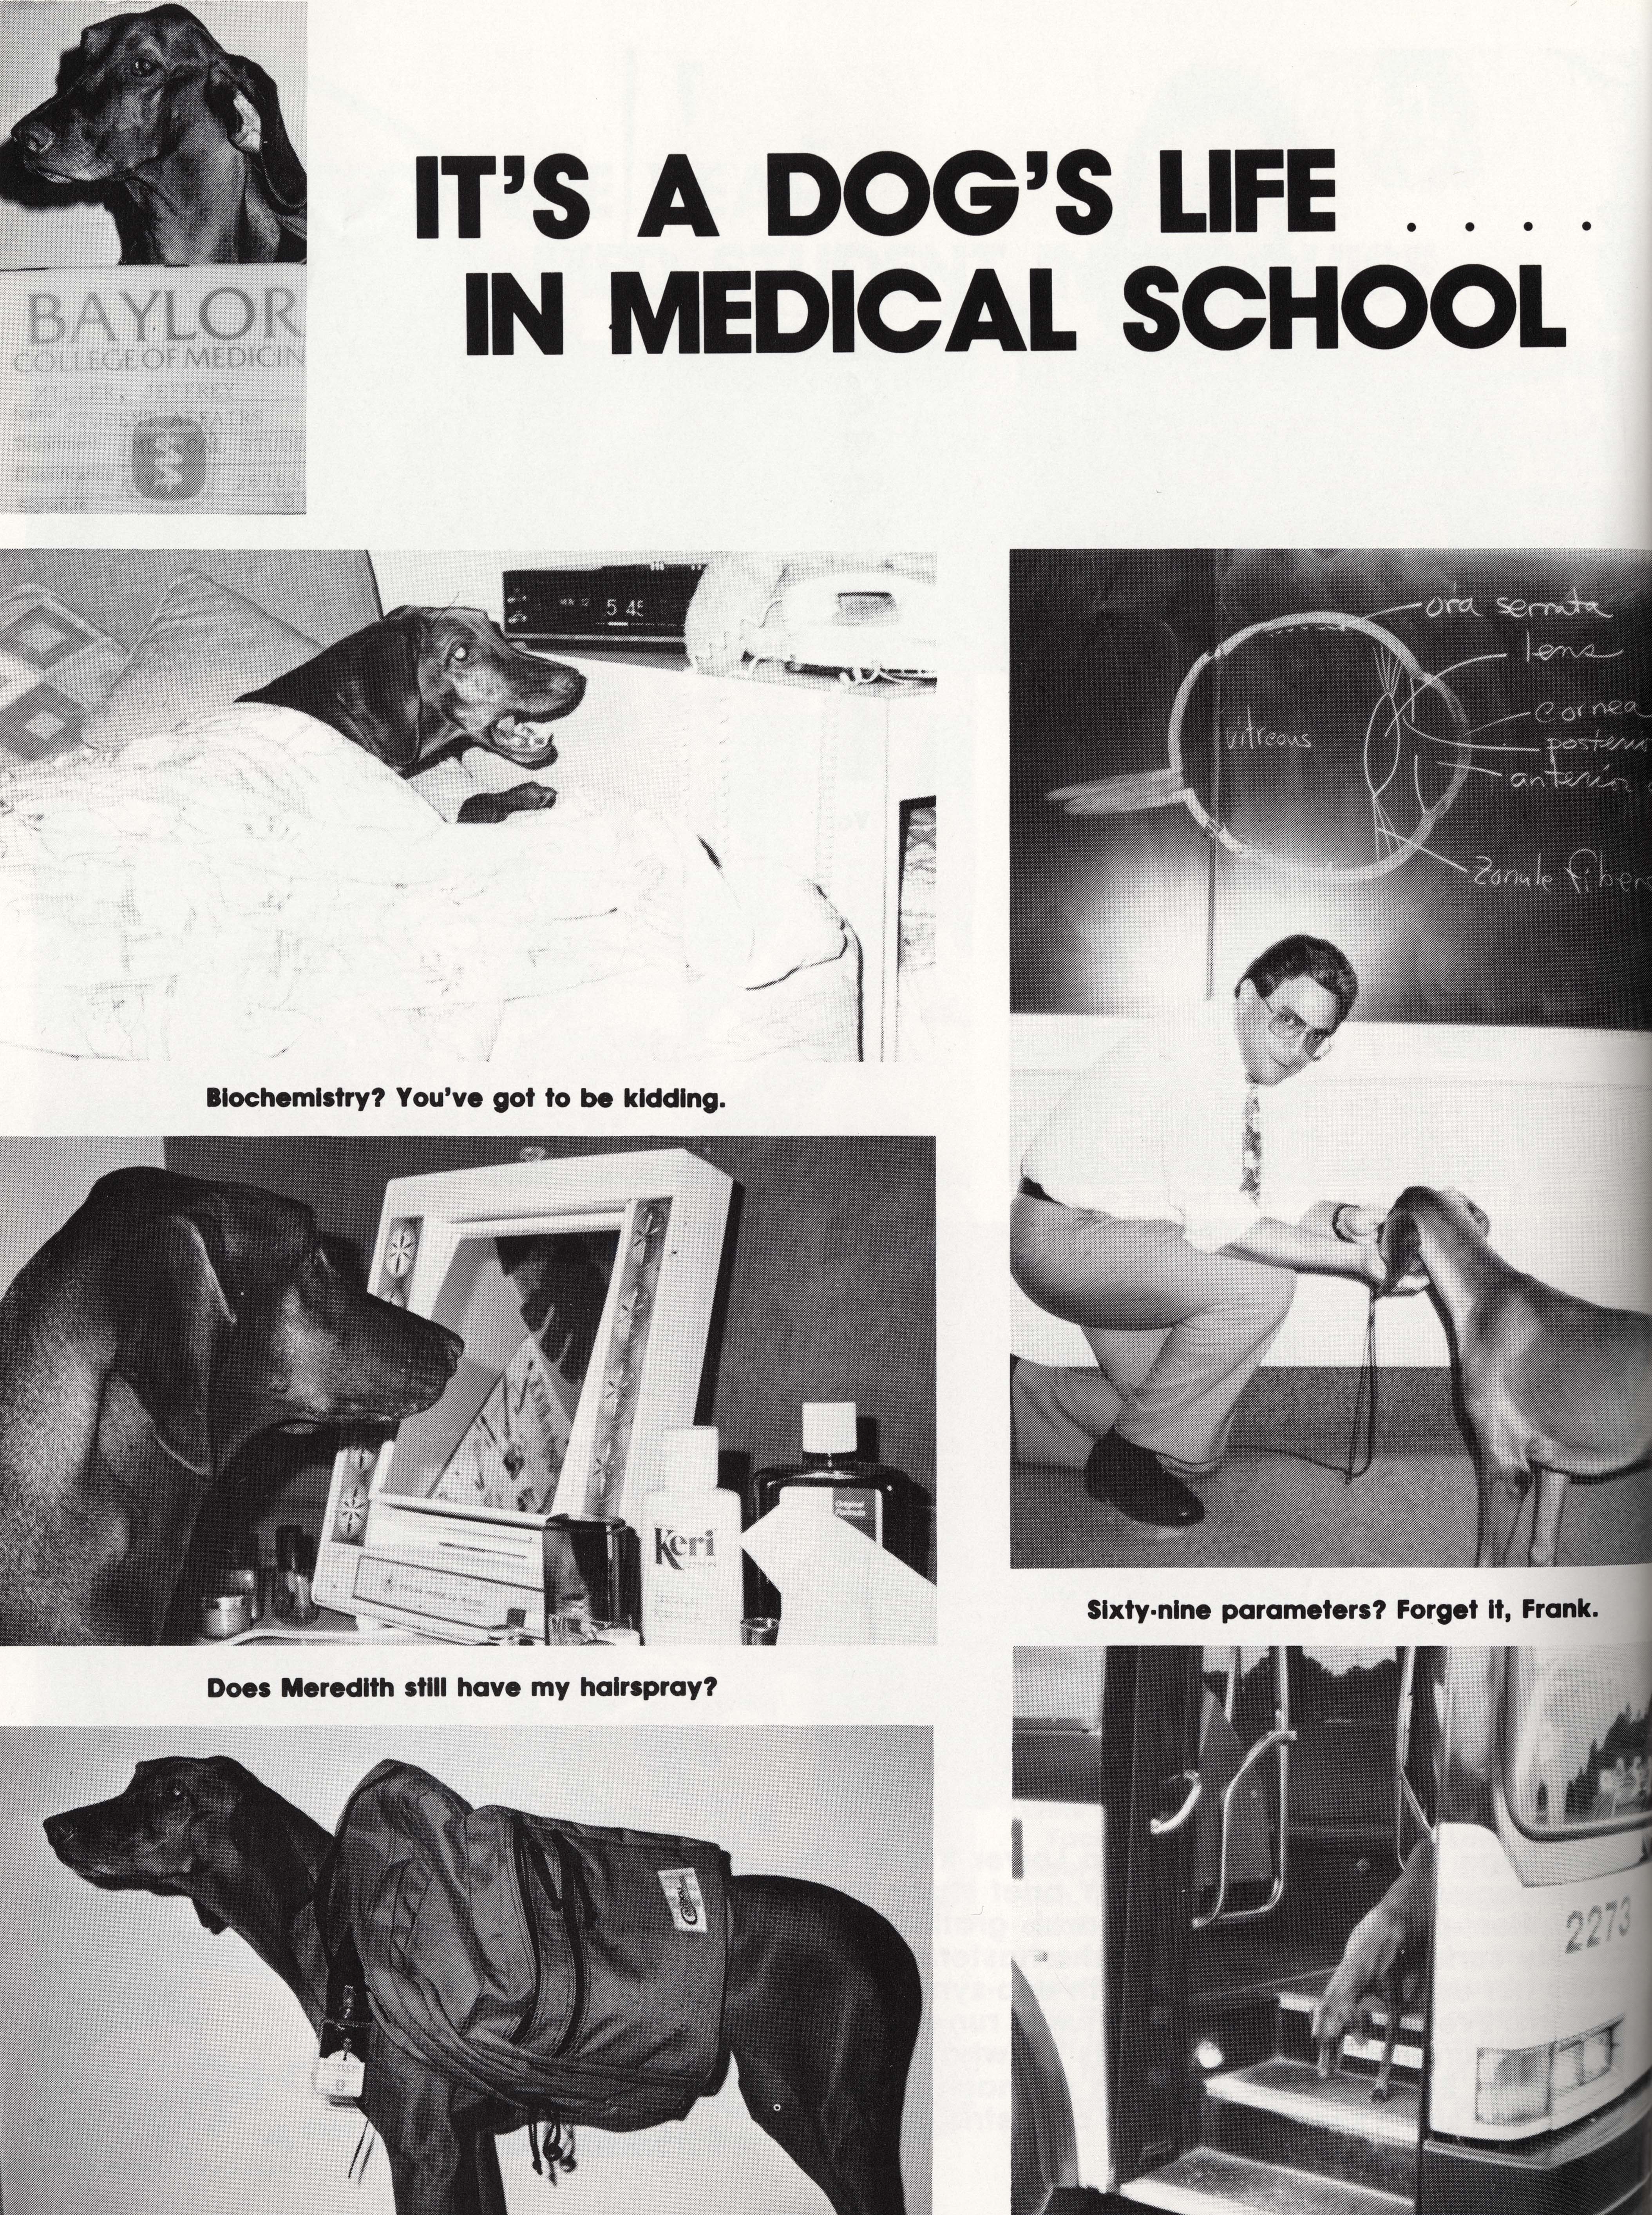 It's a dog's life for this canine med student./Photo courtesy Baylor College of Medicine Archives